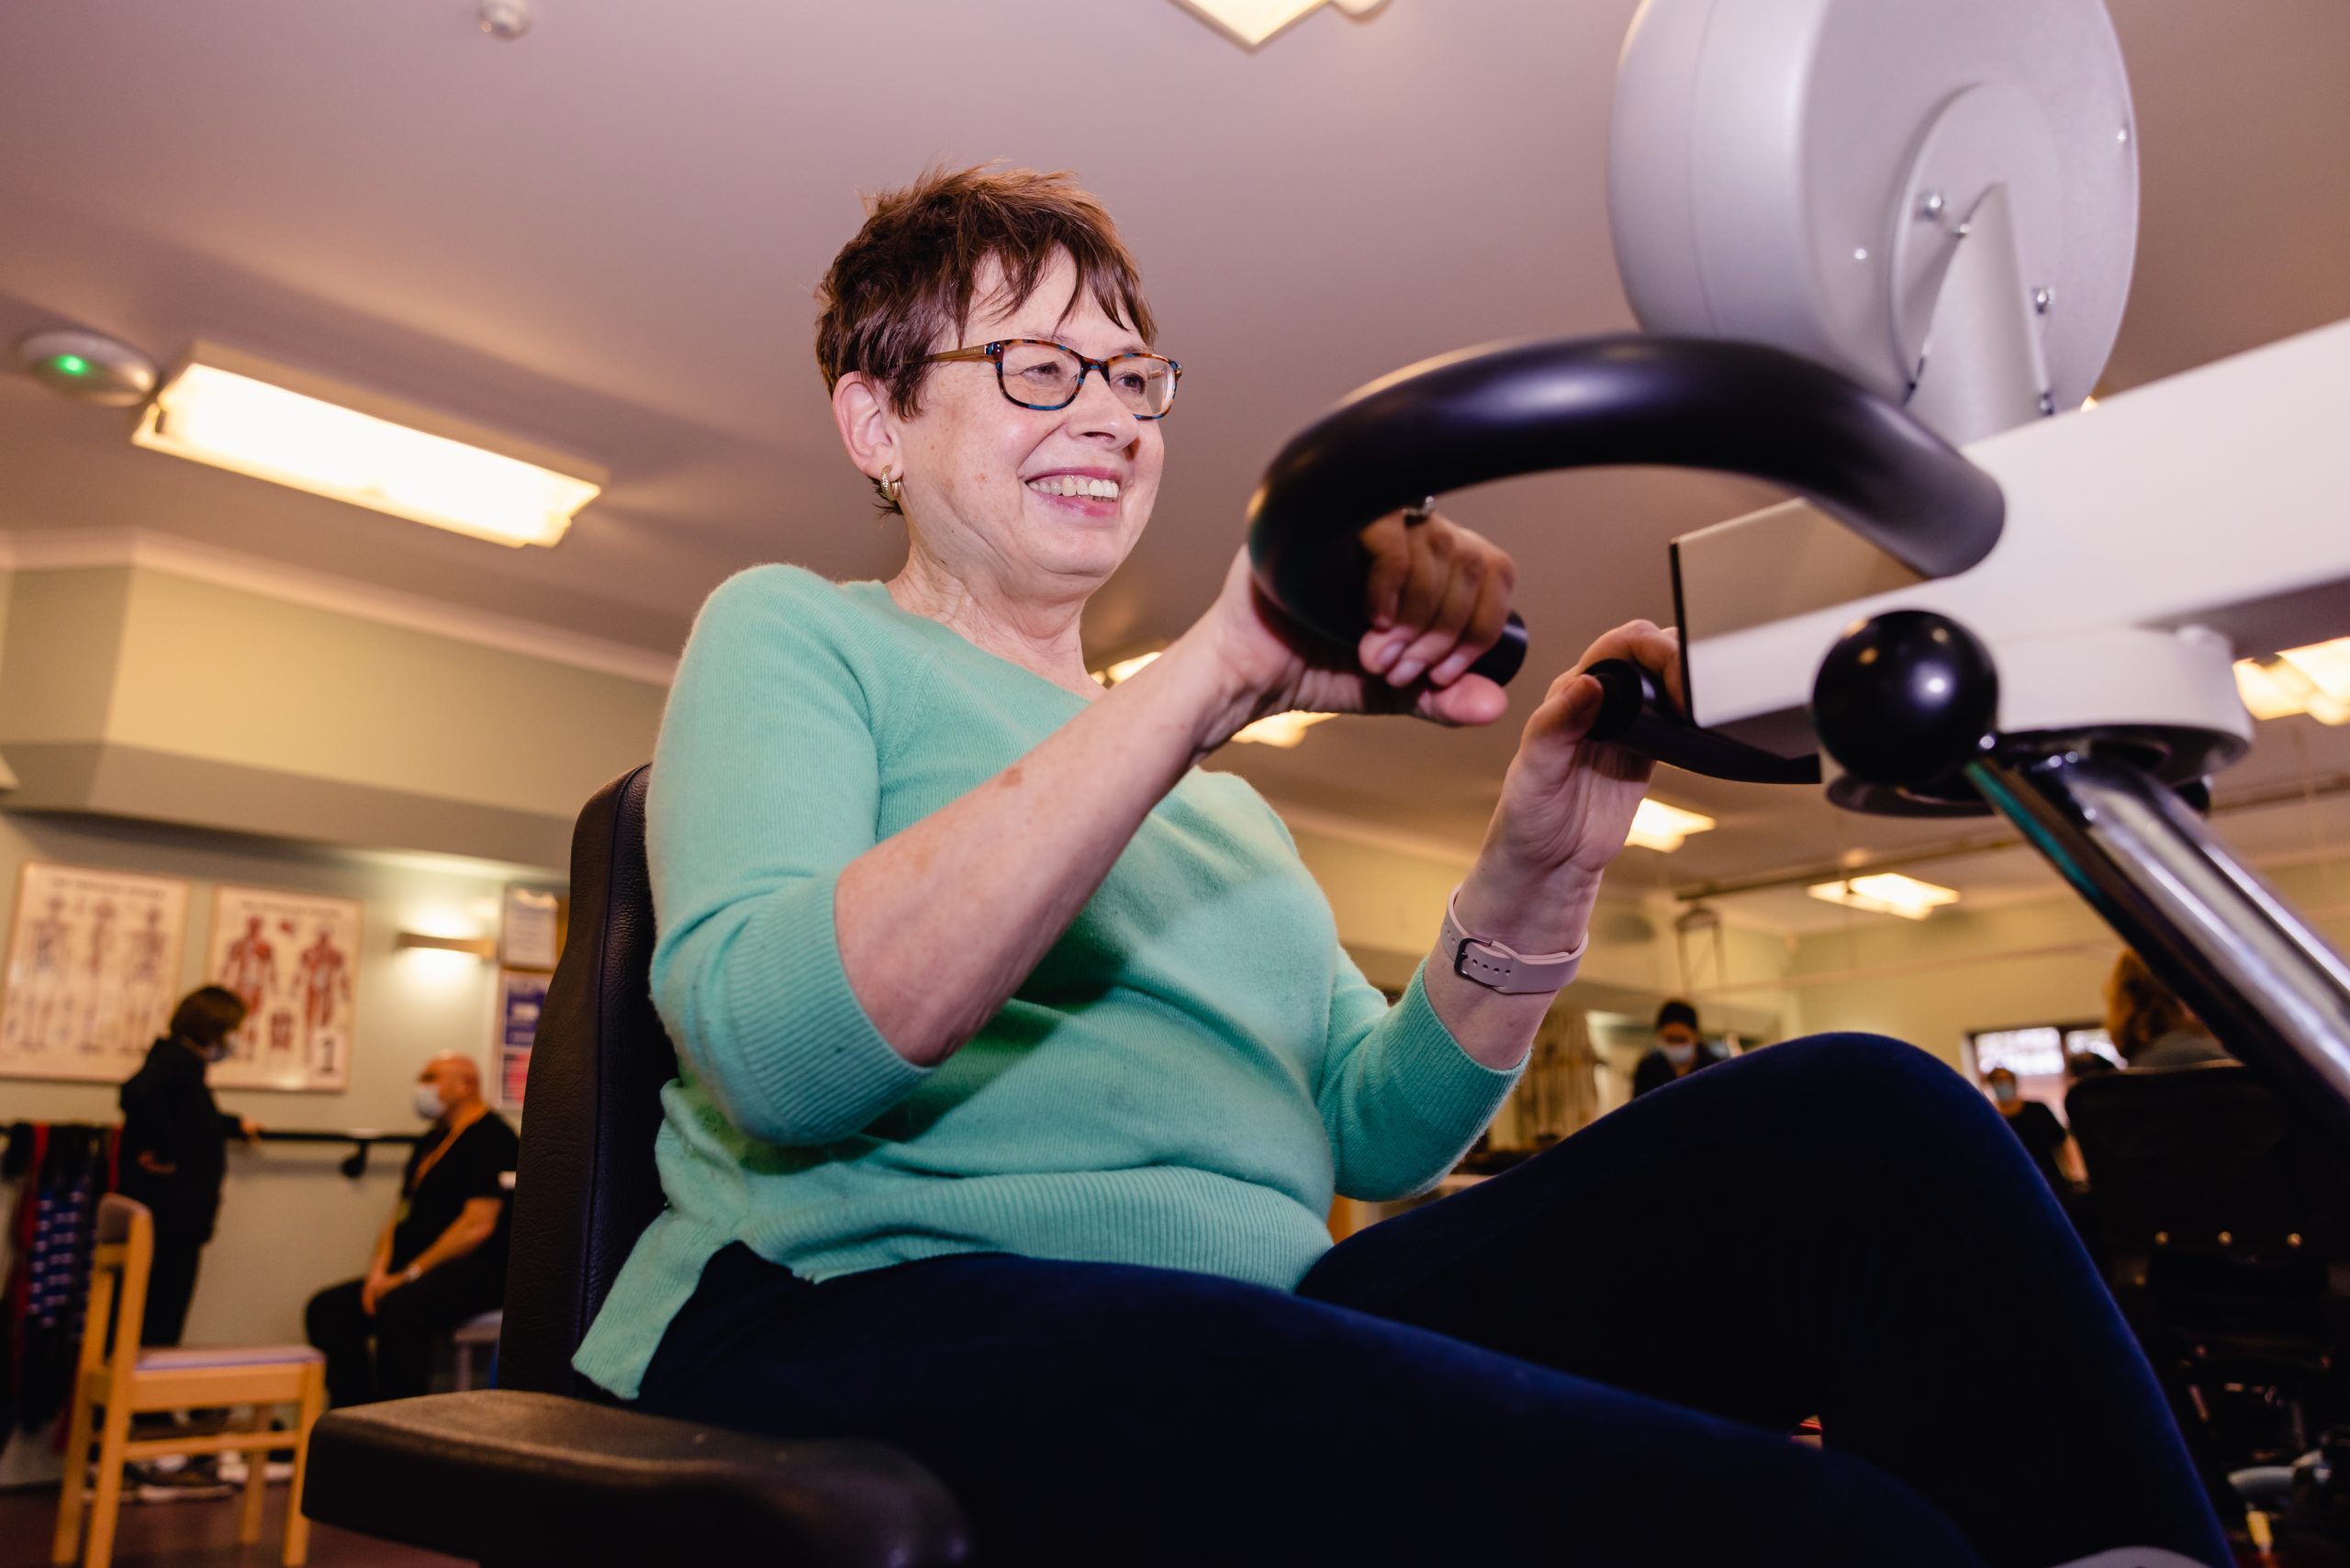 Woman smiling on an exercise bike